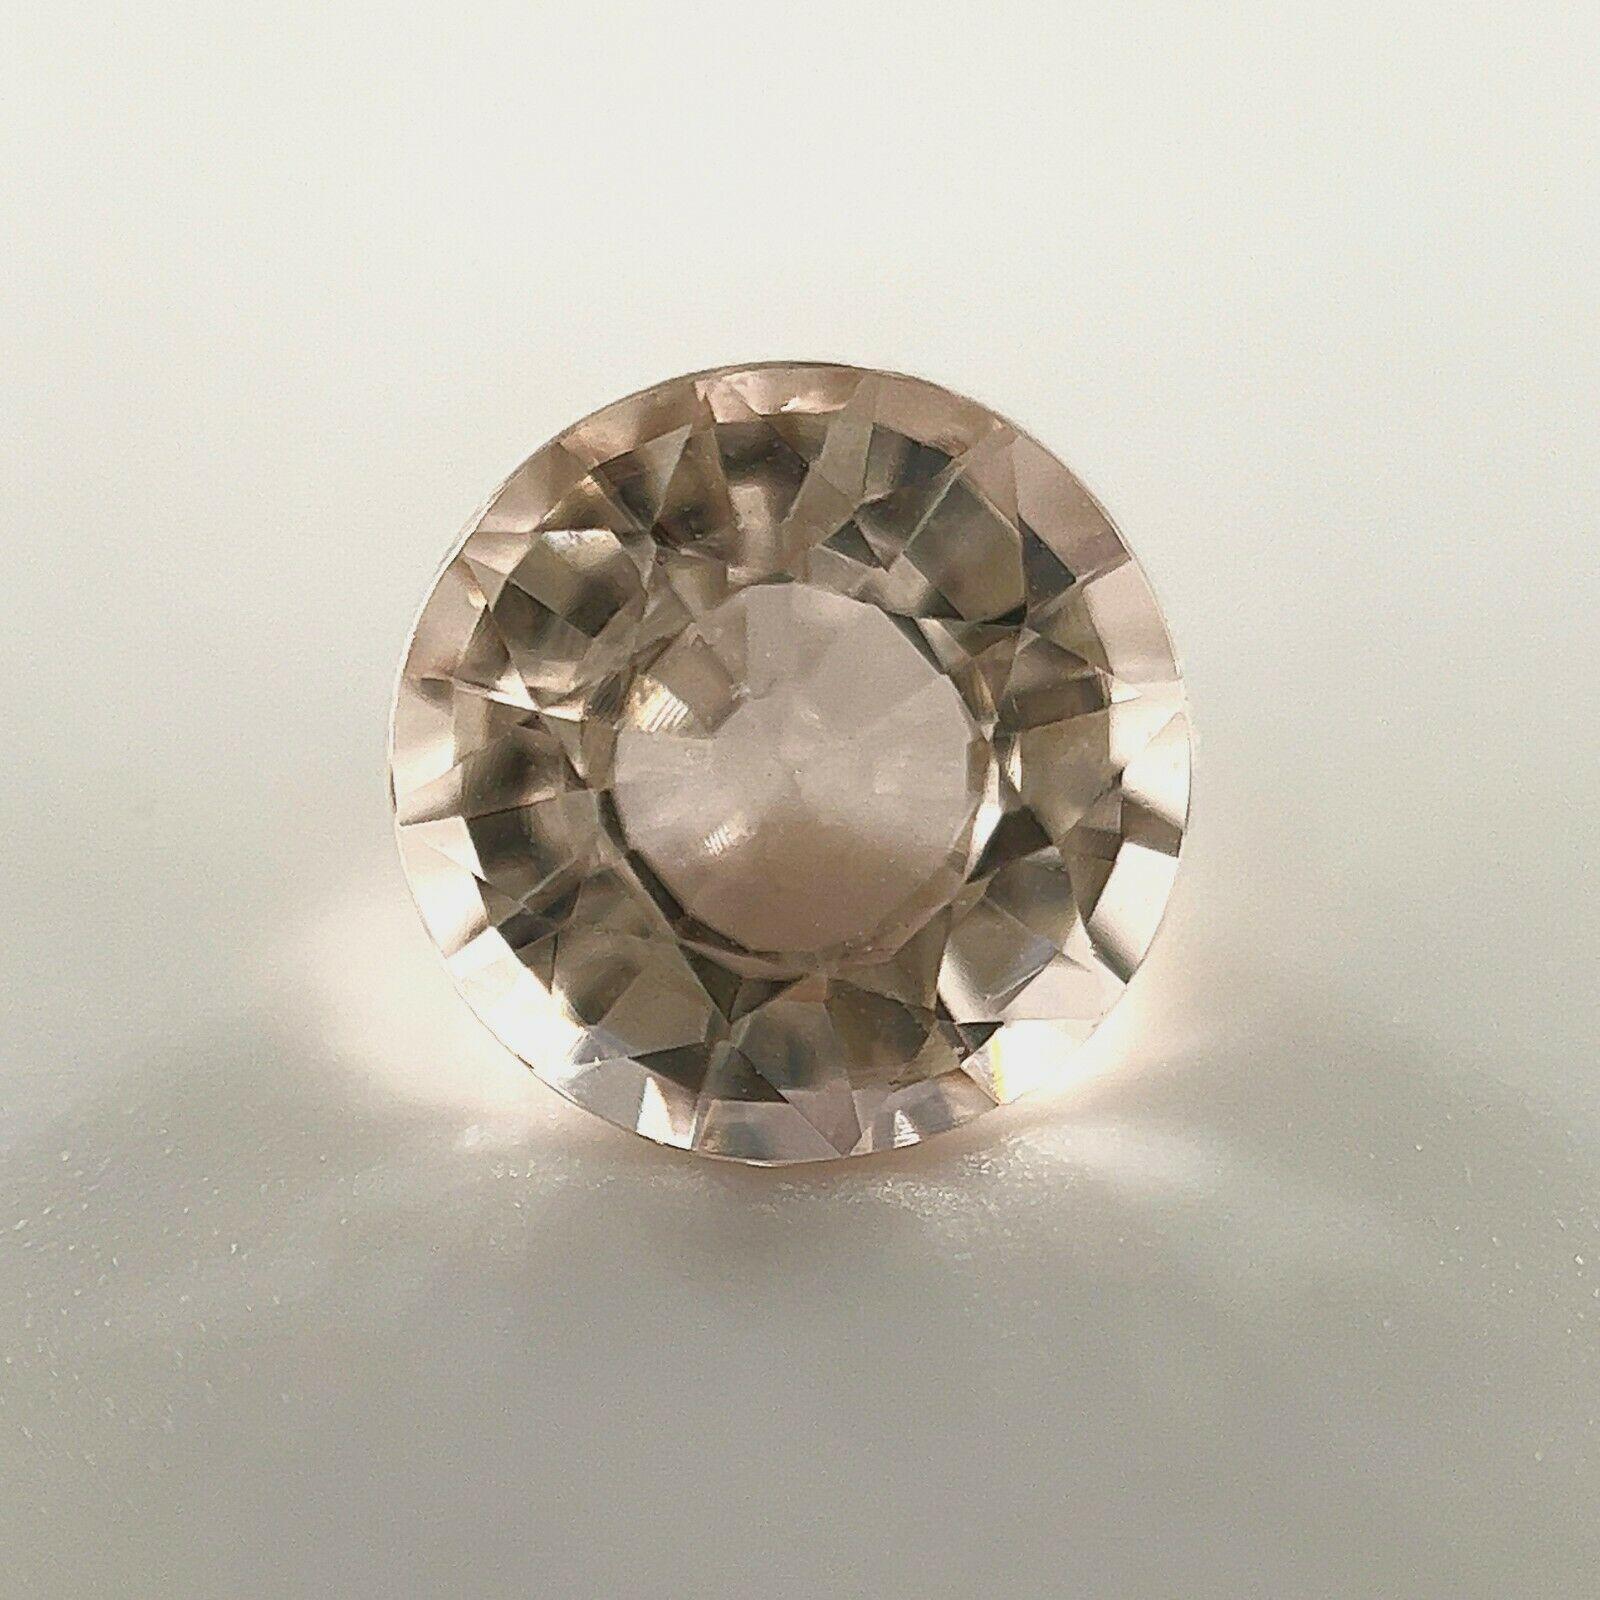 Fine Morganite 1.82ct Peach Orange Pink Beryl Round Cut 8mm Loose Gemstone

Fine Natural Morganite Gemstone.
1.82 Carat with a beautiful pink orange peach colour and excellent clarity. Also has an excellent round cut with excellent proportions and